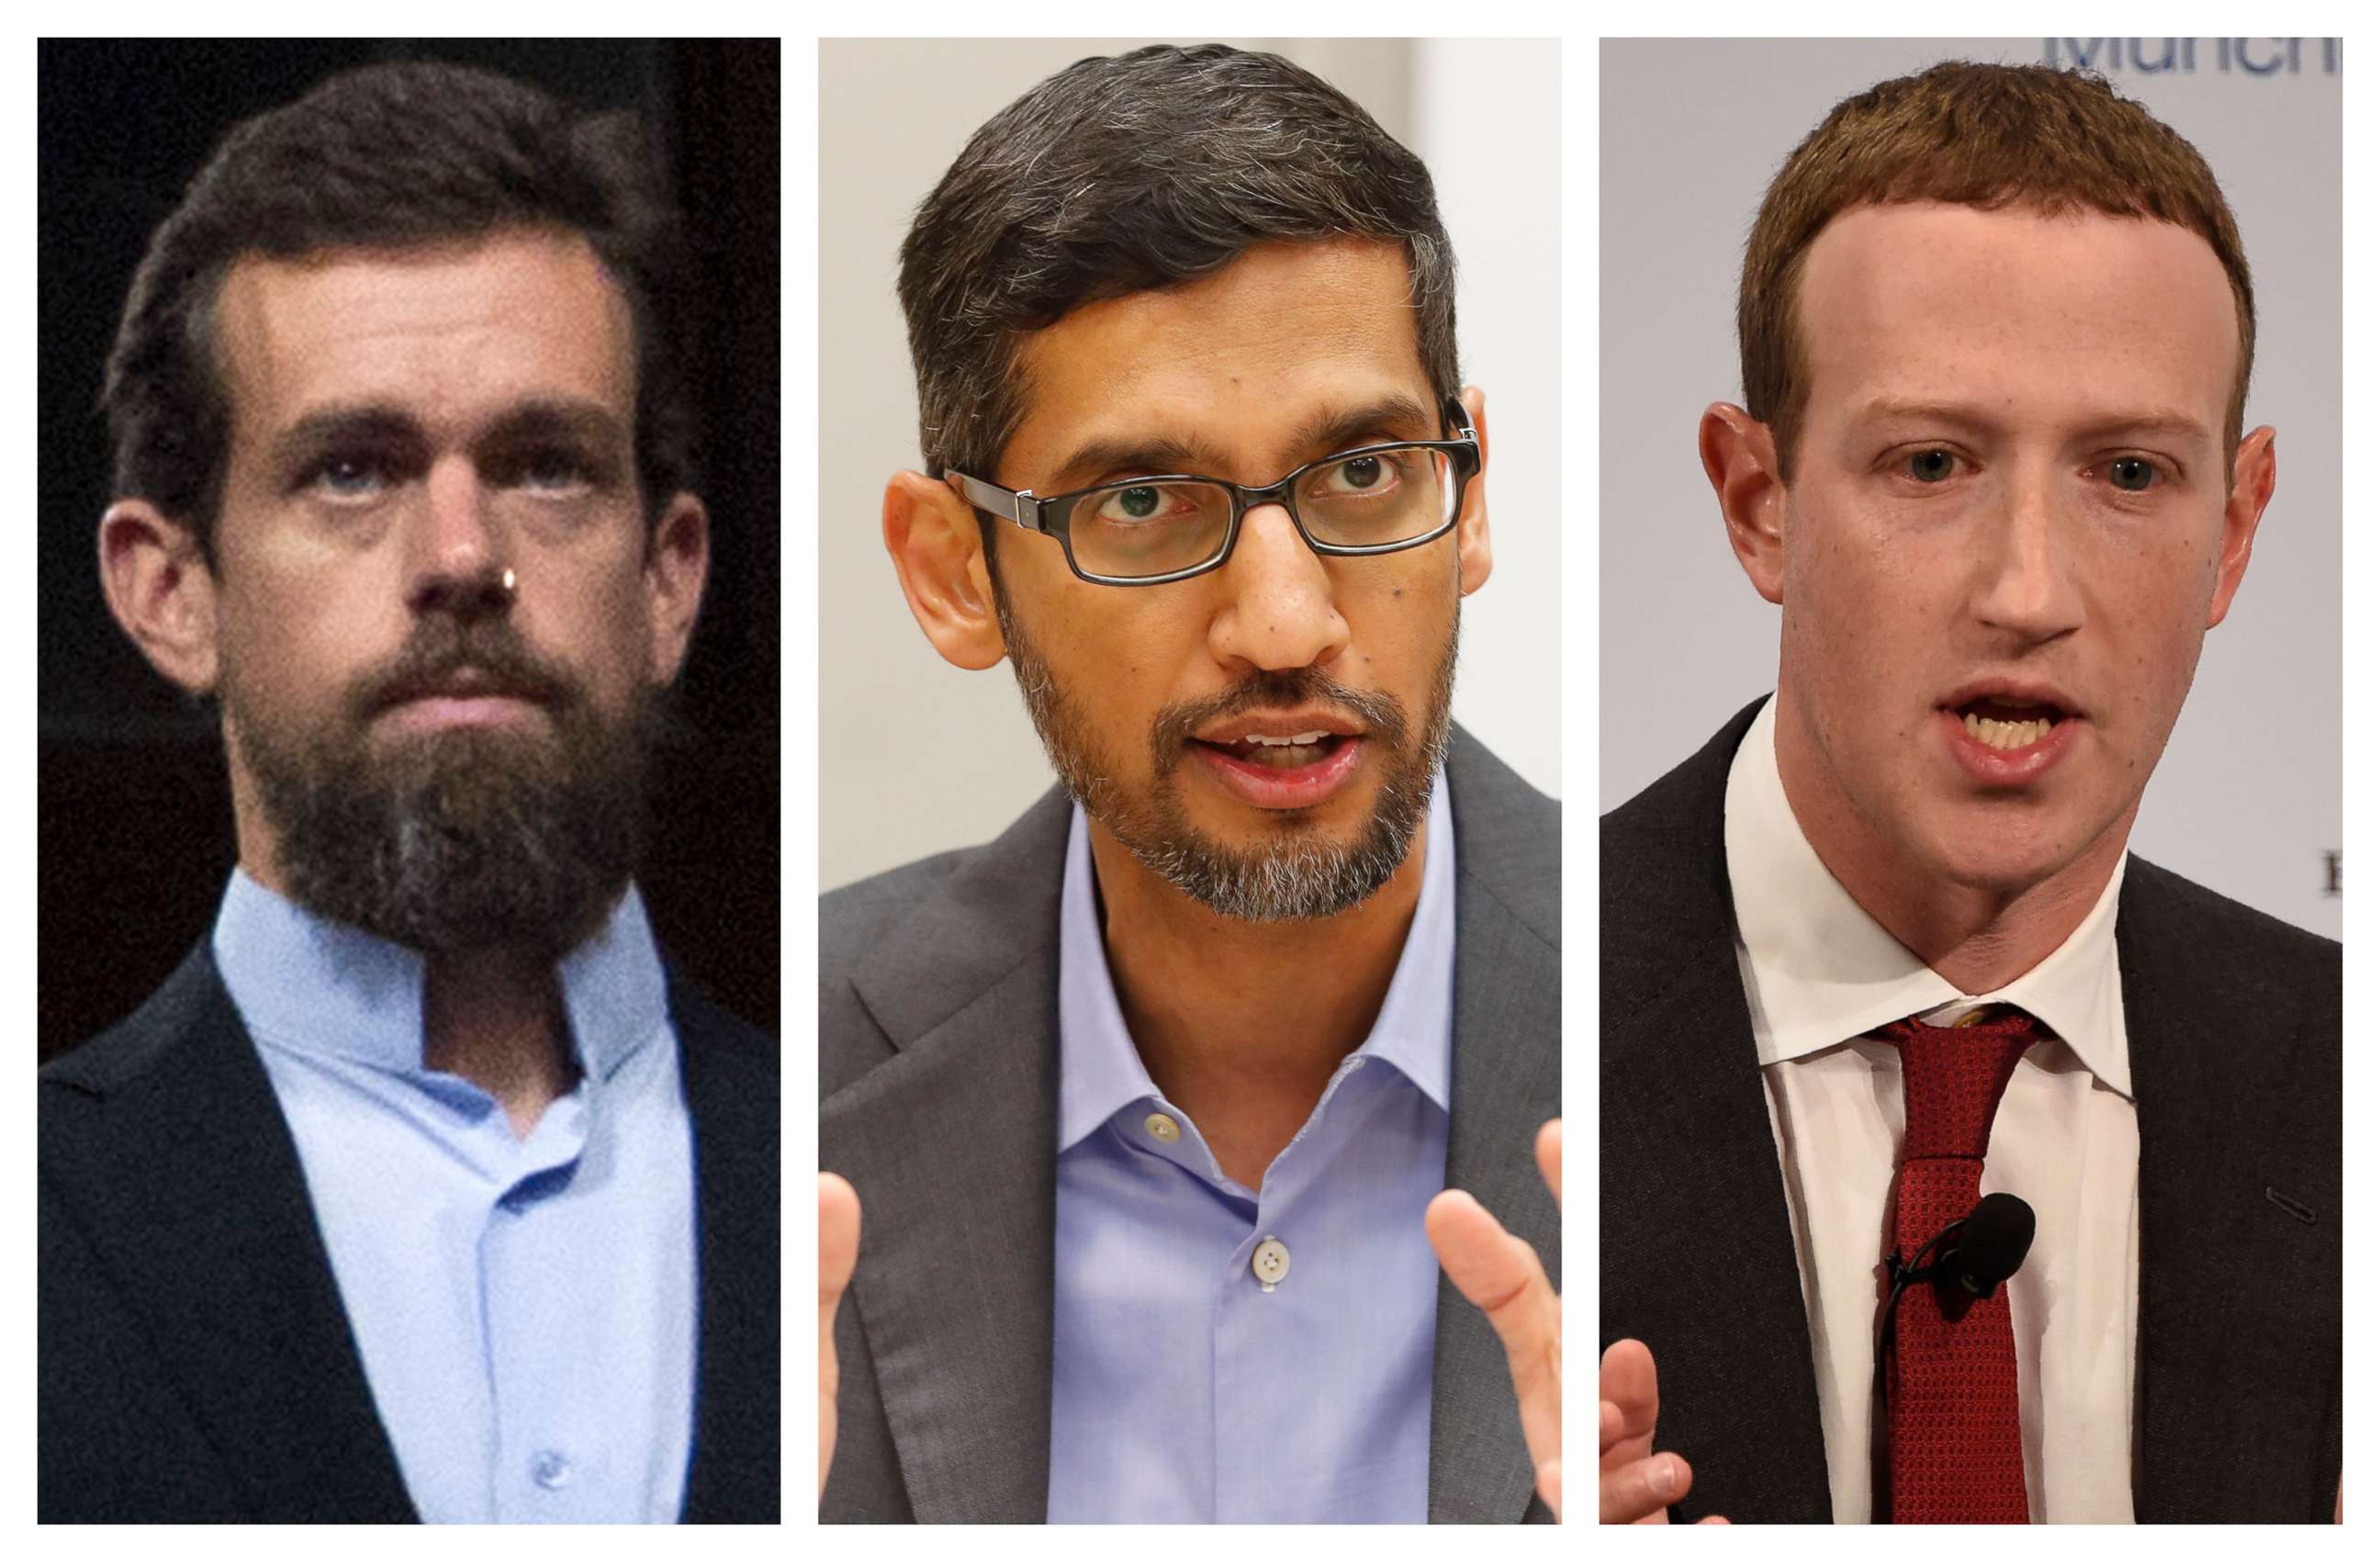 PHOTO: These 2018-2020 photos show, from left, Twitter CEO Jack Dorsey, Google CEO Sundar Pichai, and Facebook CEO Mark Zuckerberg. They will appear in Congress, March 25, 2021 on their efforts to prevent spreading falsehoods and inciting violence. 